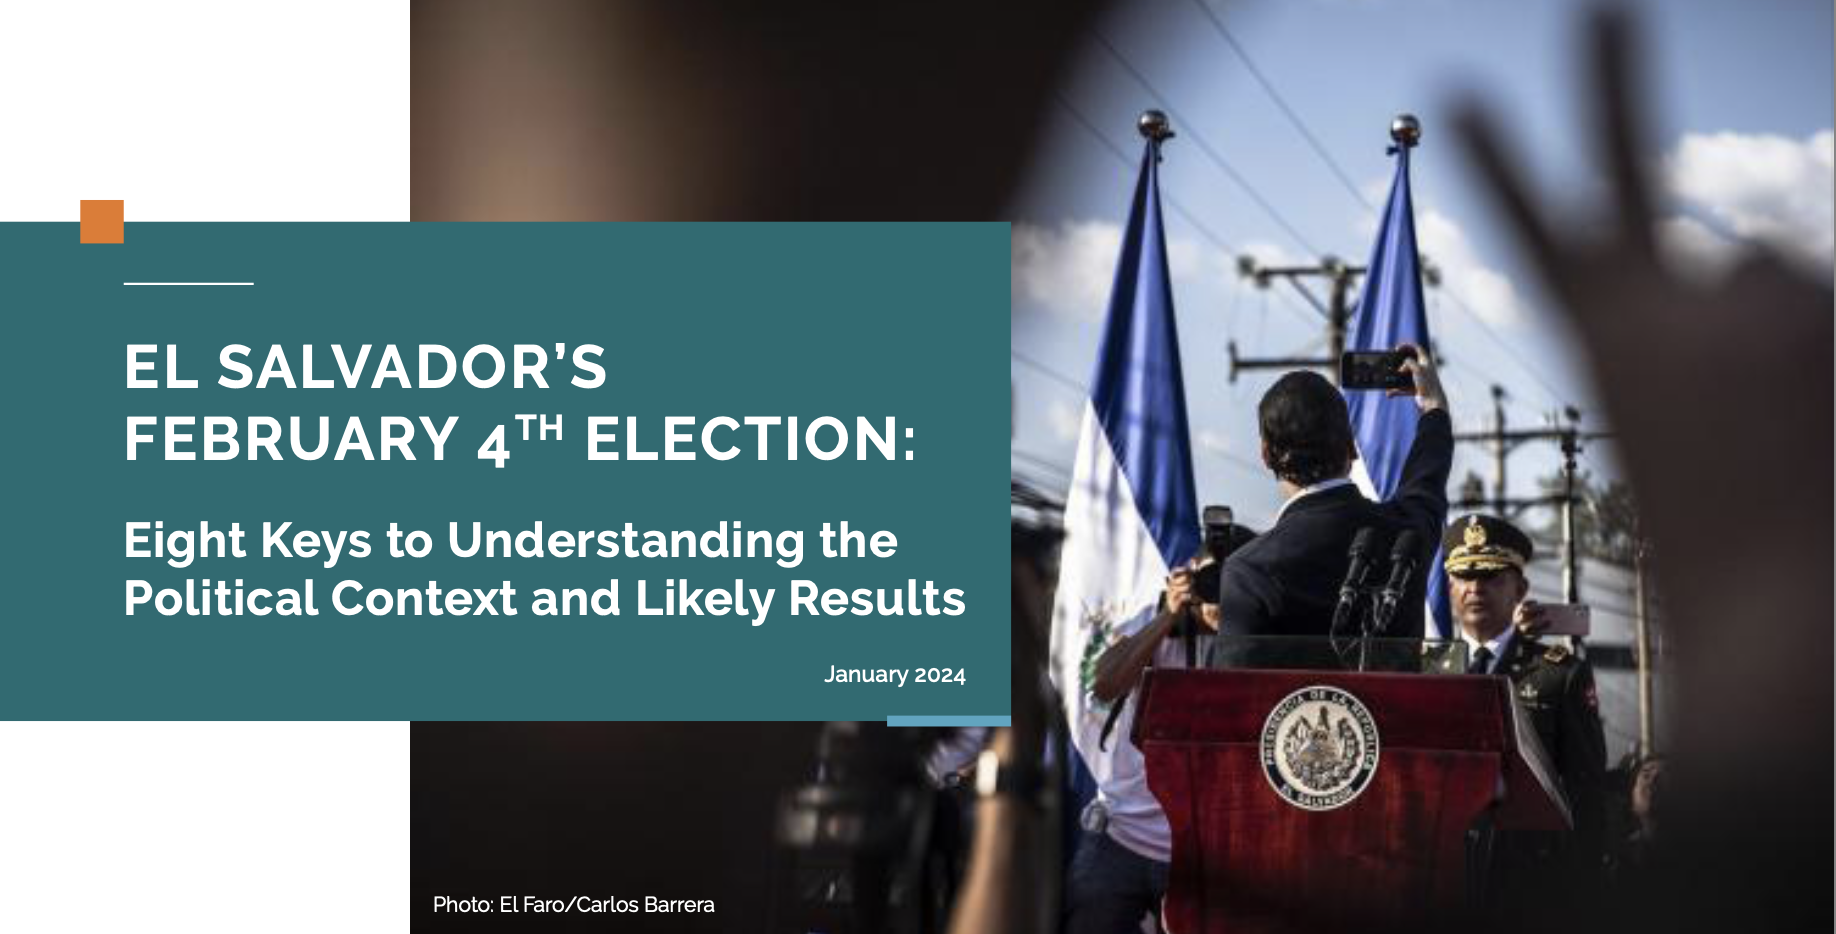 El Salvador’s February 4th Election: Eight Keys to Understanding the Political Context and Likely Results